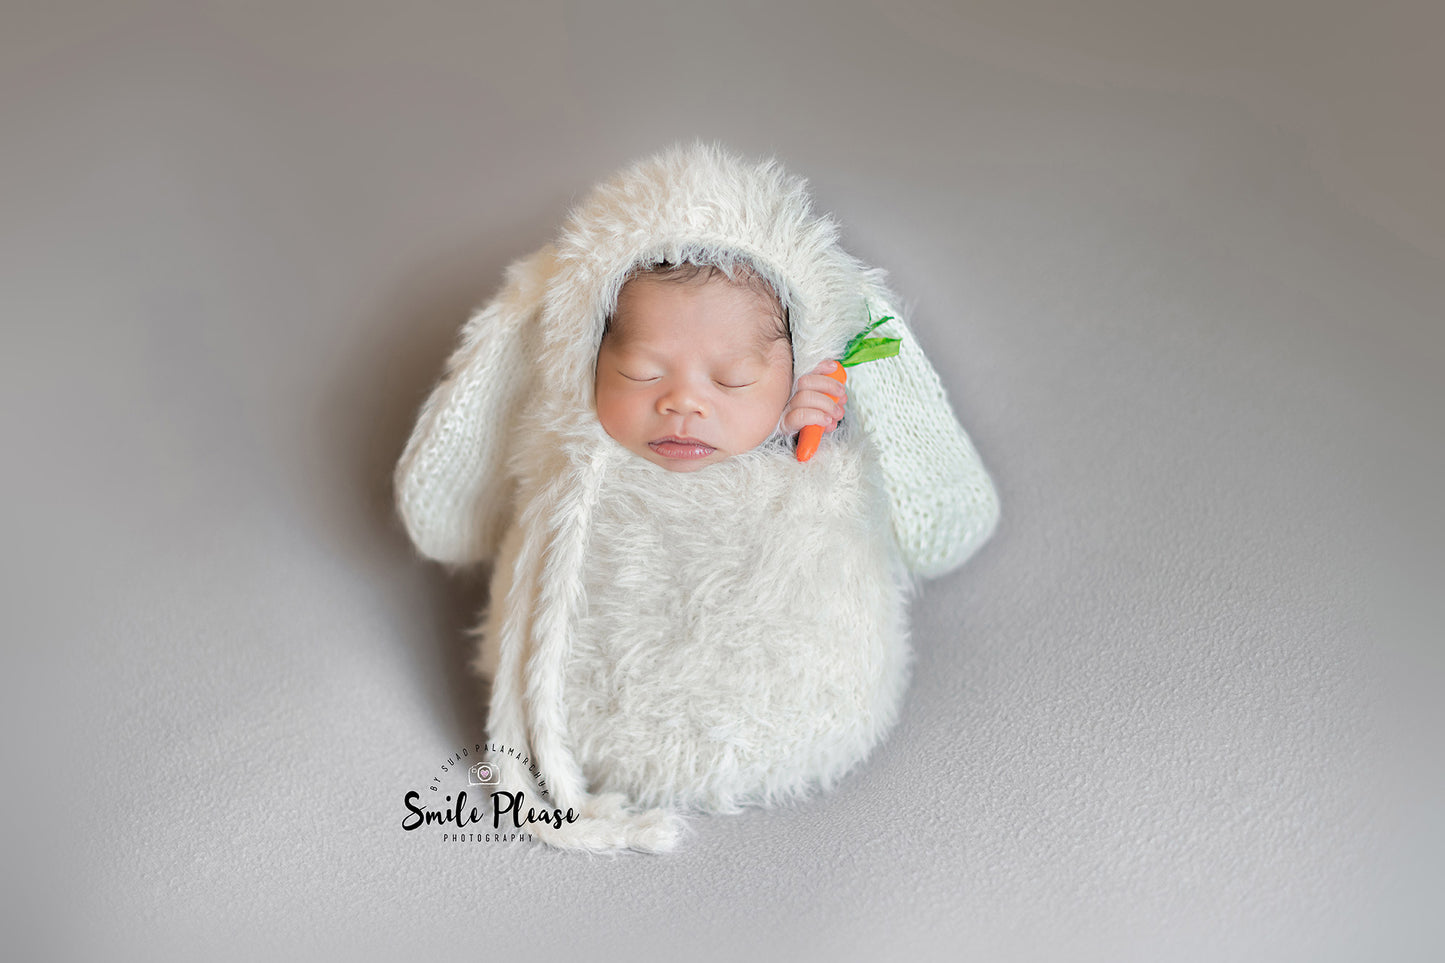 Newborn photography showing a baby in cozy bunny-themed clothing, dozing with a miniature carrot in hand, ideal for capturing the innocence and whimsy of early days.